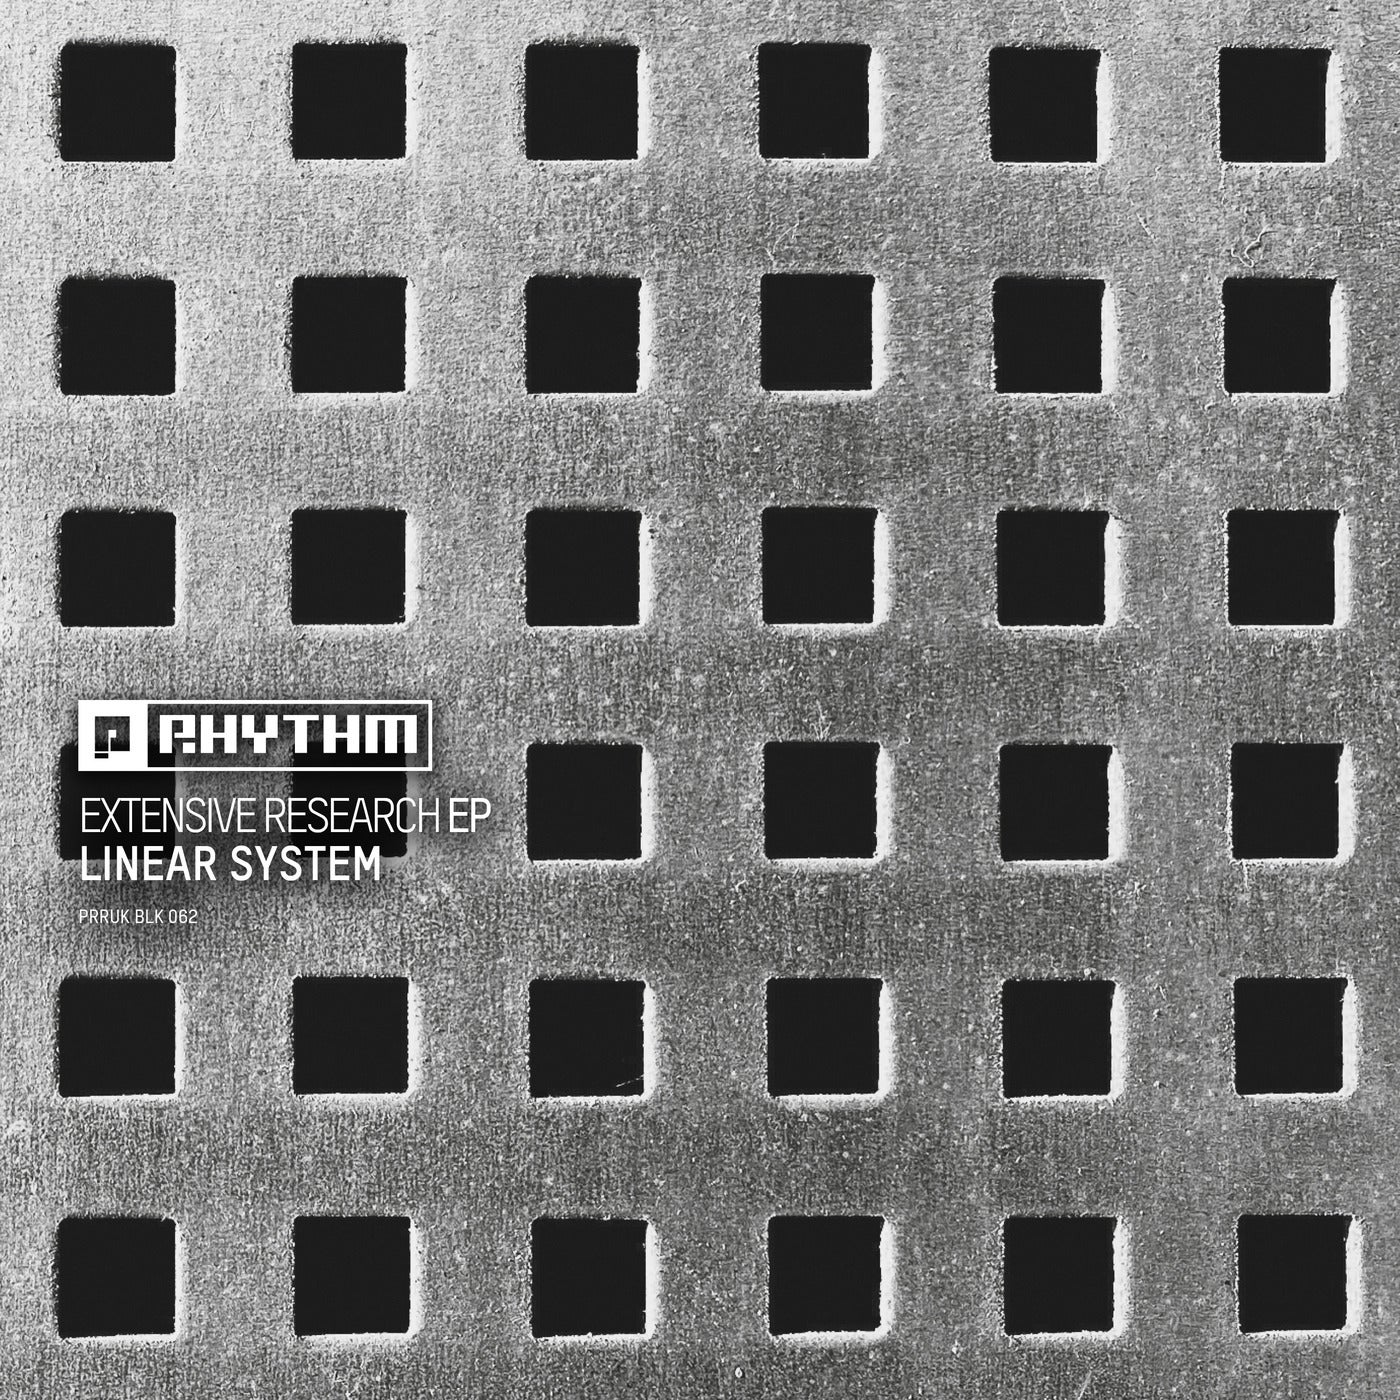 image cover: Linear System - Extensive Research EP / PRRUKBLK062